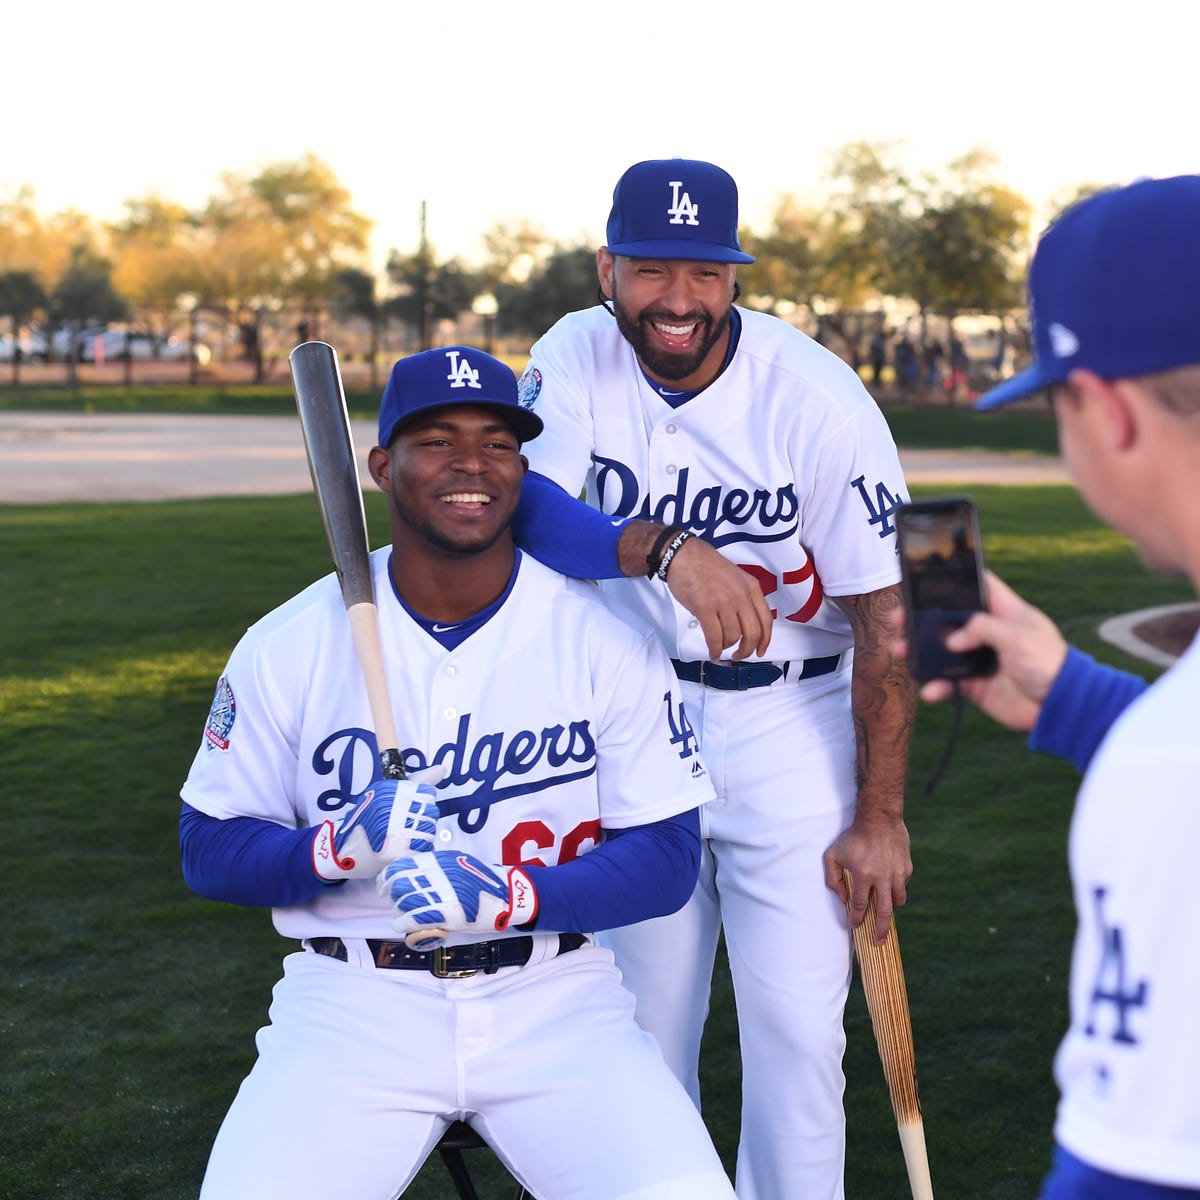 Kemp and Puig made their marks in Dodger history with production